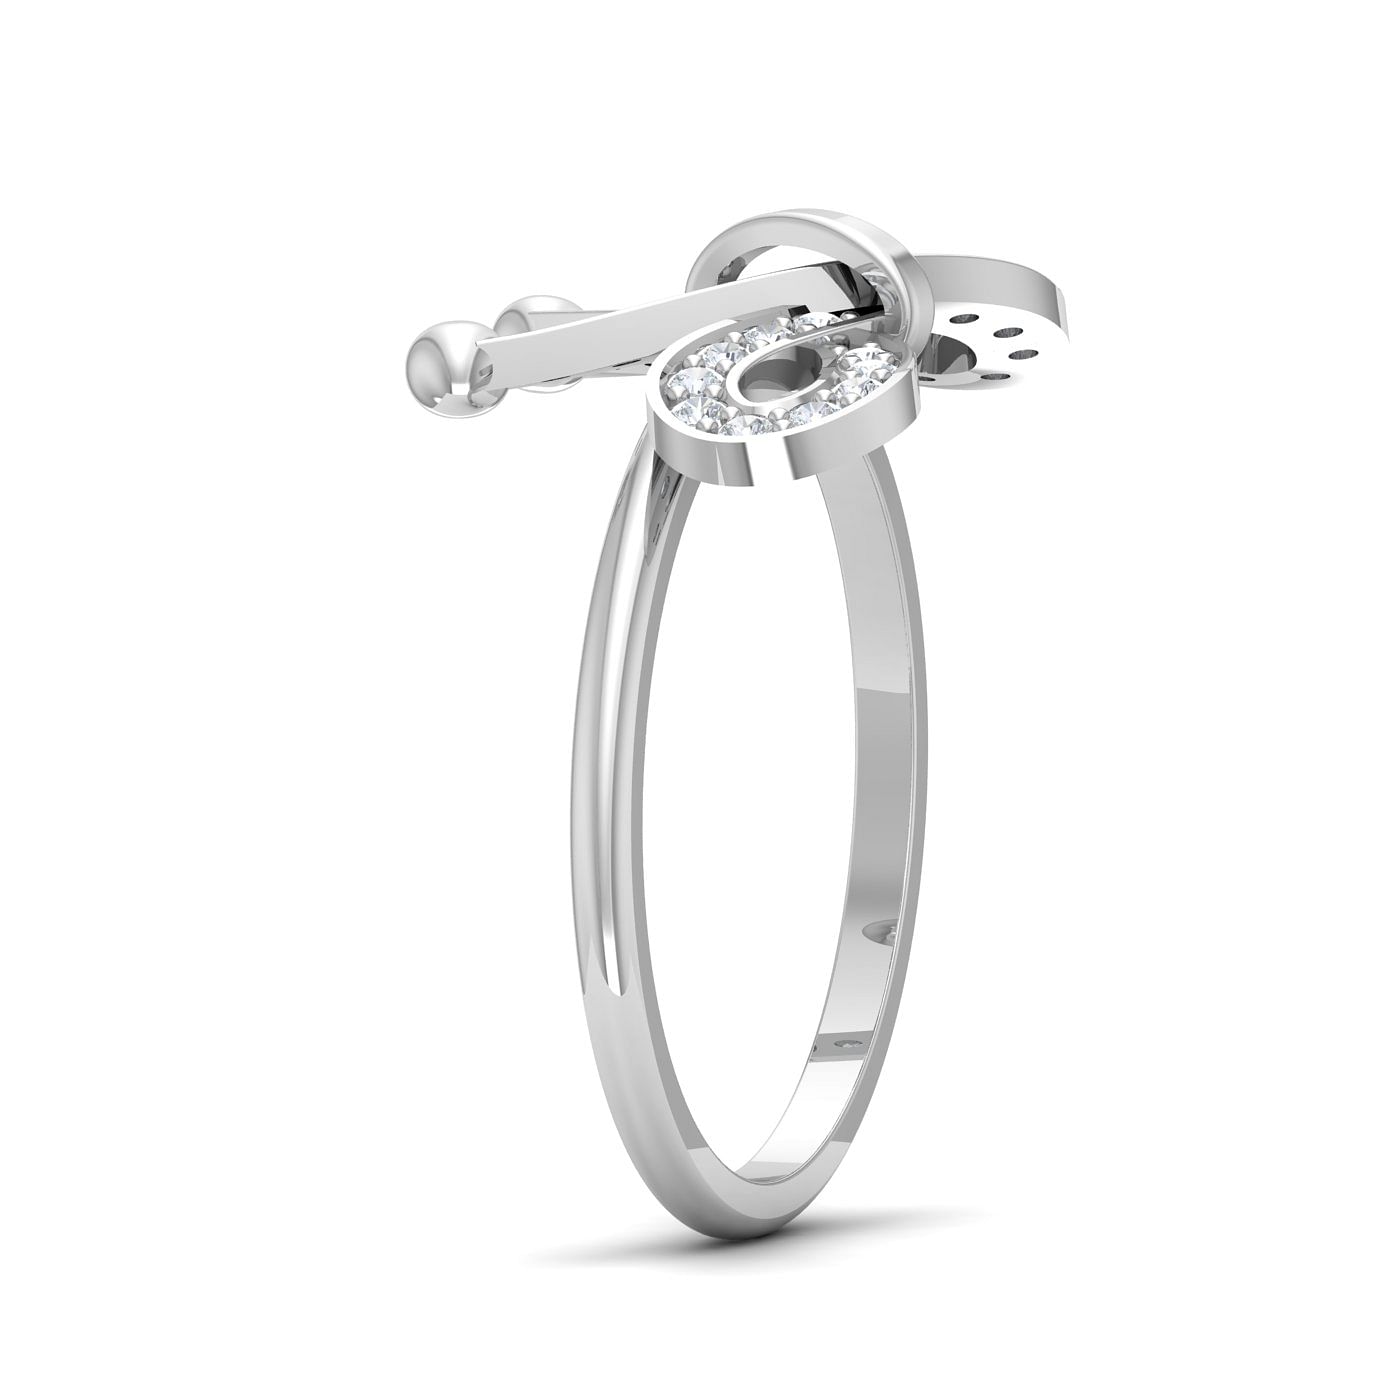 Bow Knot Diamond Ring With White Gold For Women